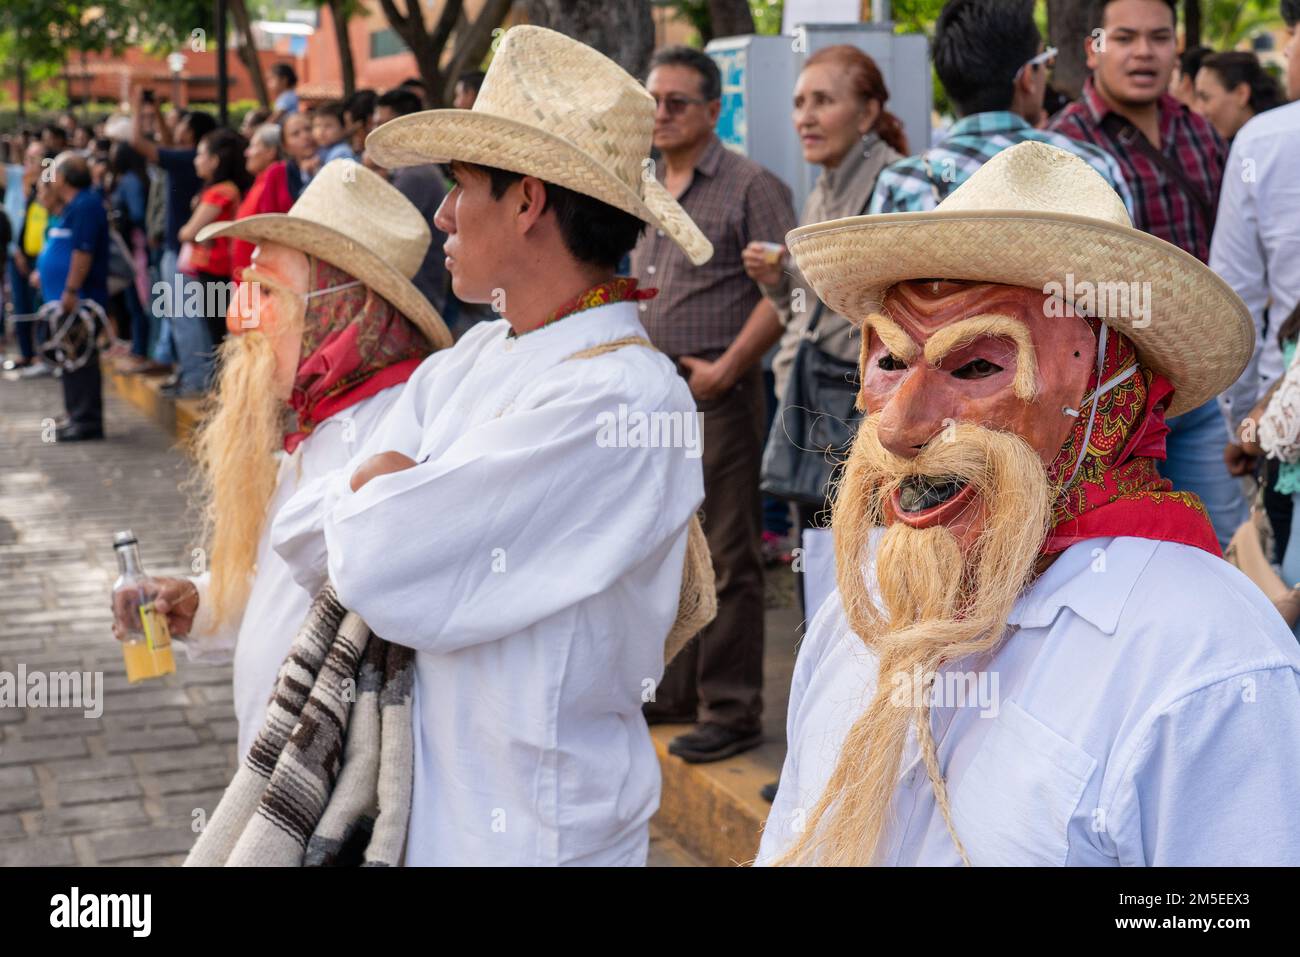 The Danza de los Jardineros dance troupe from San Andres Zautla performs during the Guelaguetza festival in Oaxaca, Mexico.  Two of the characters wea Stock Photo